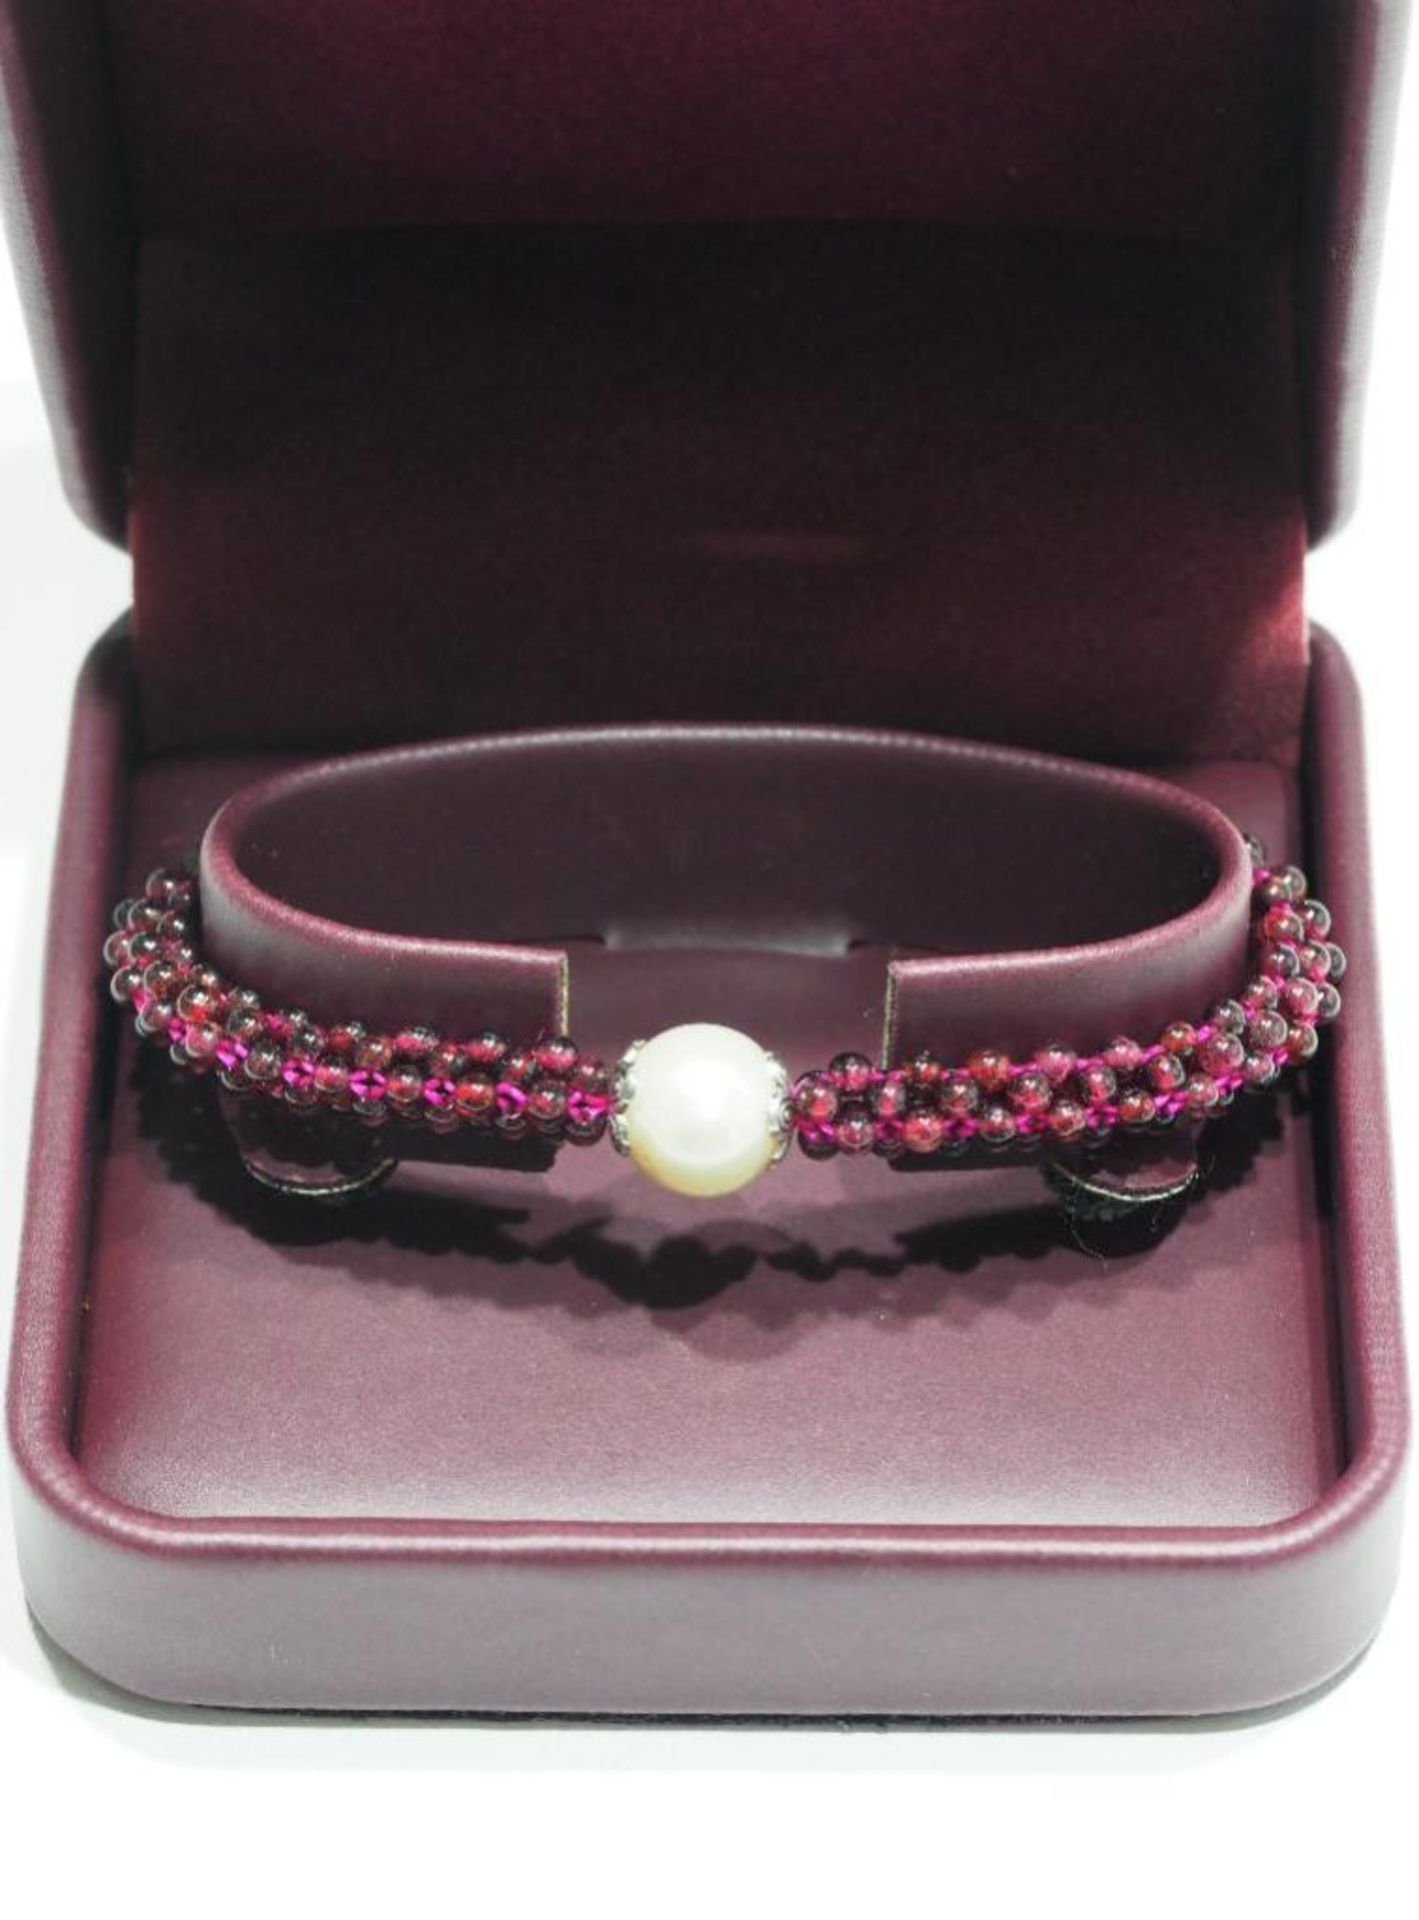 Genuine Garnet (January Birthstone) and Cultured Pearl Flexible Size Bracelet Appraised $465 - Image 4 of 4